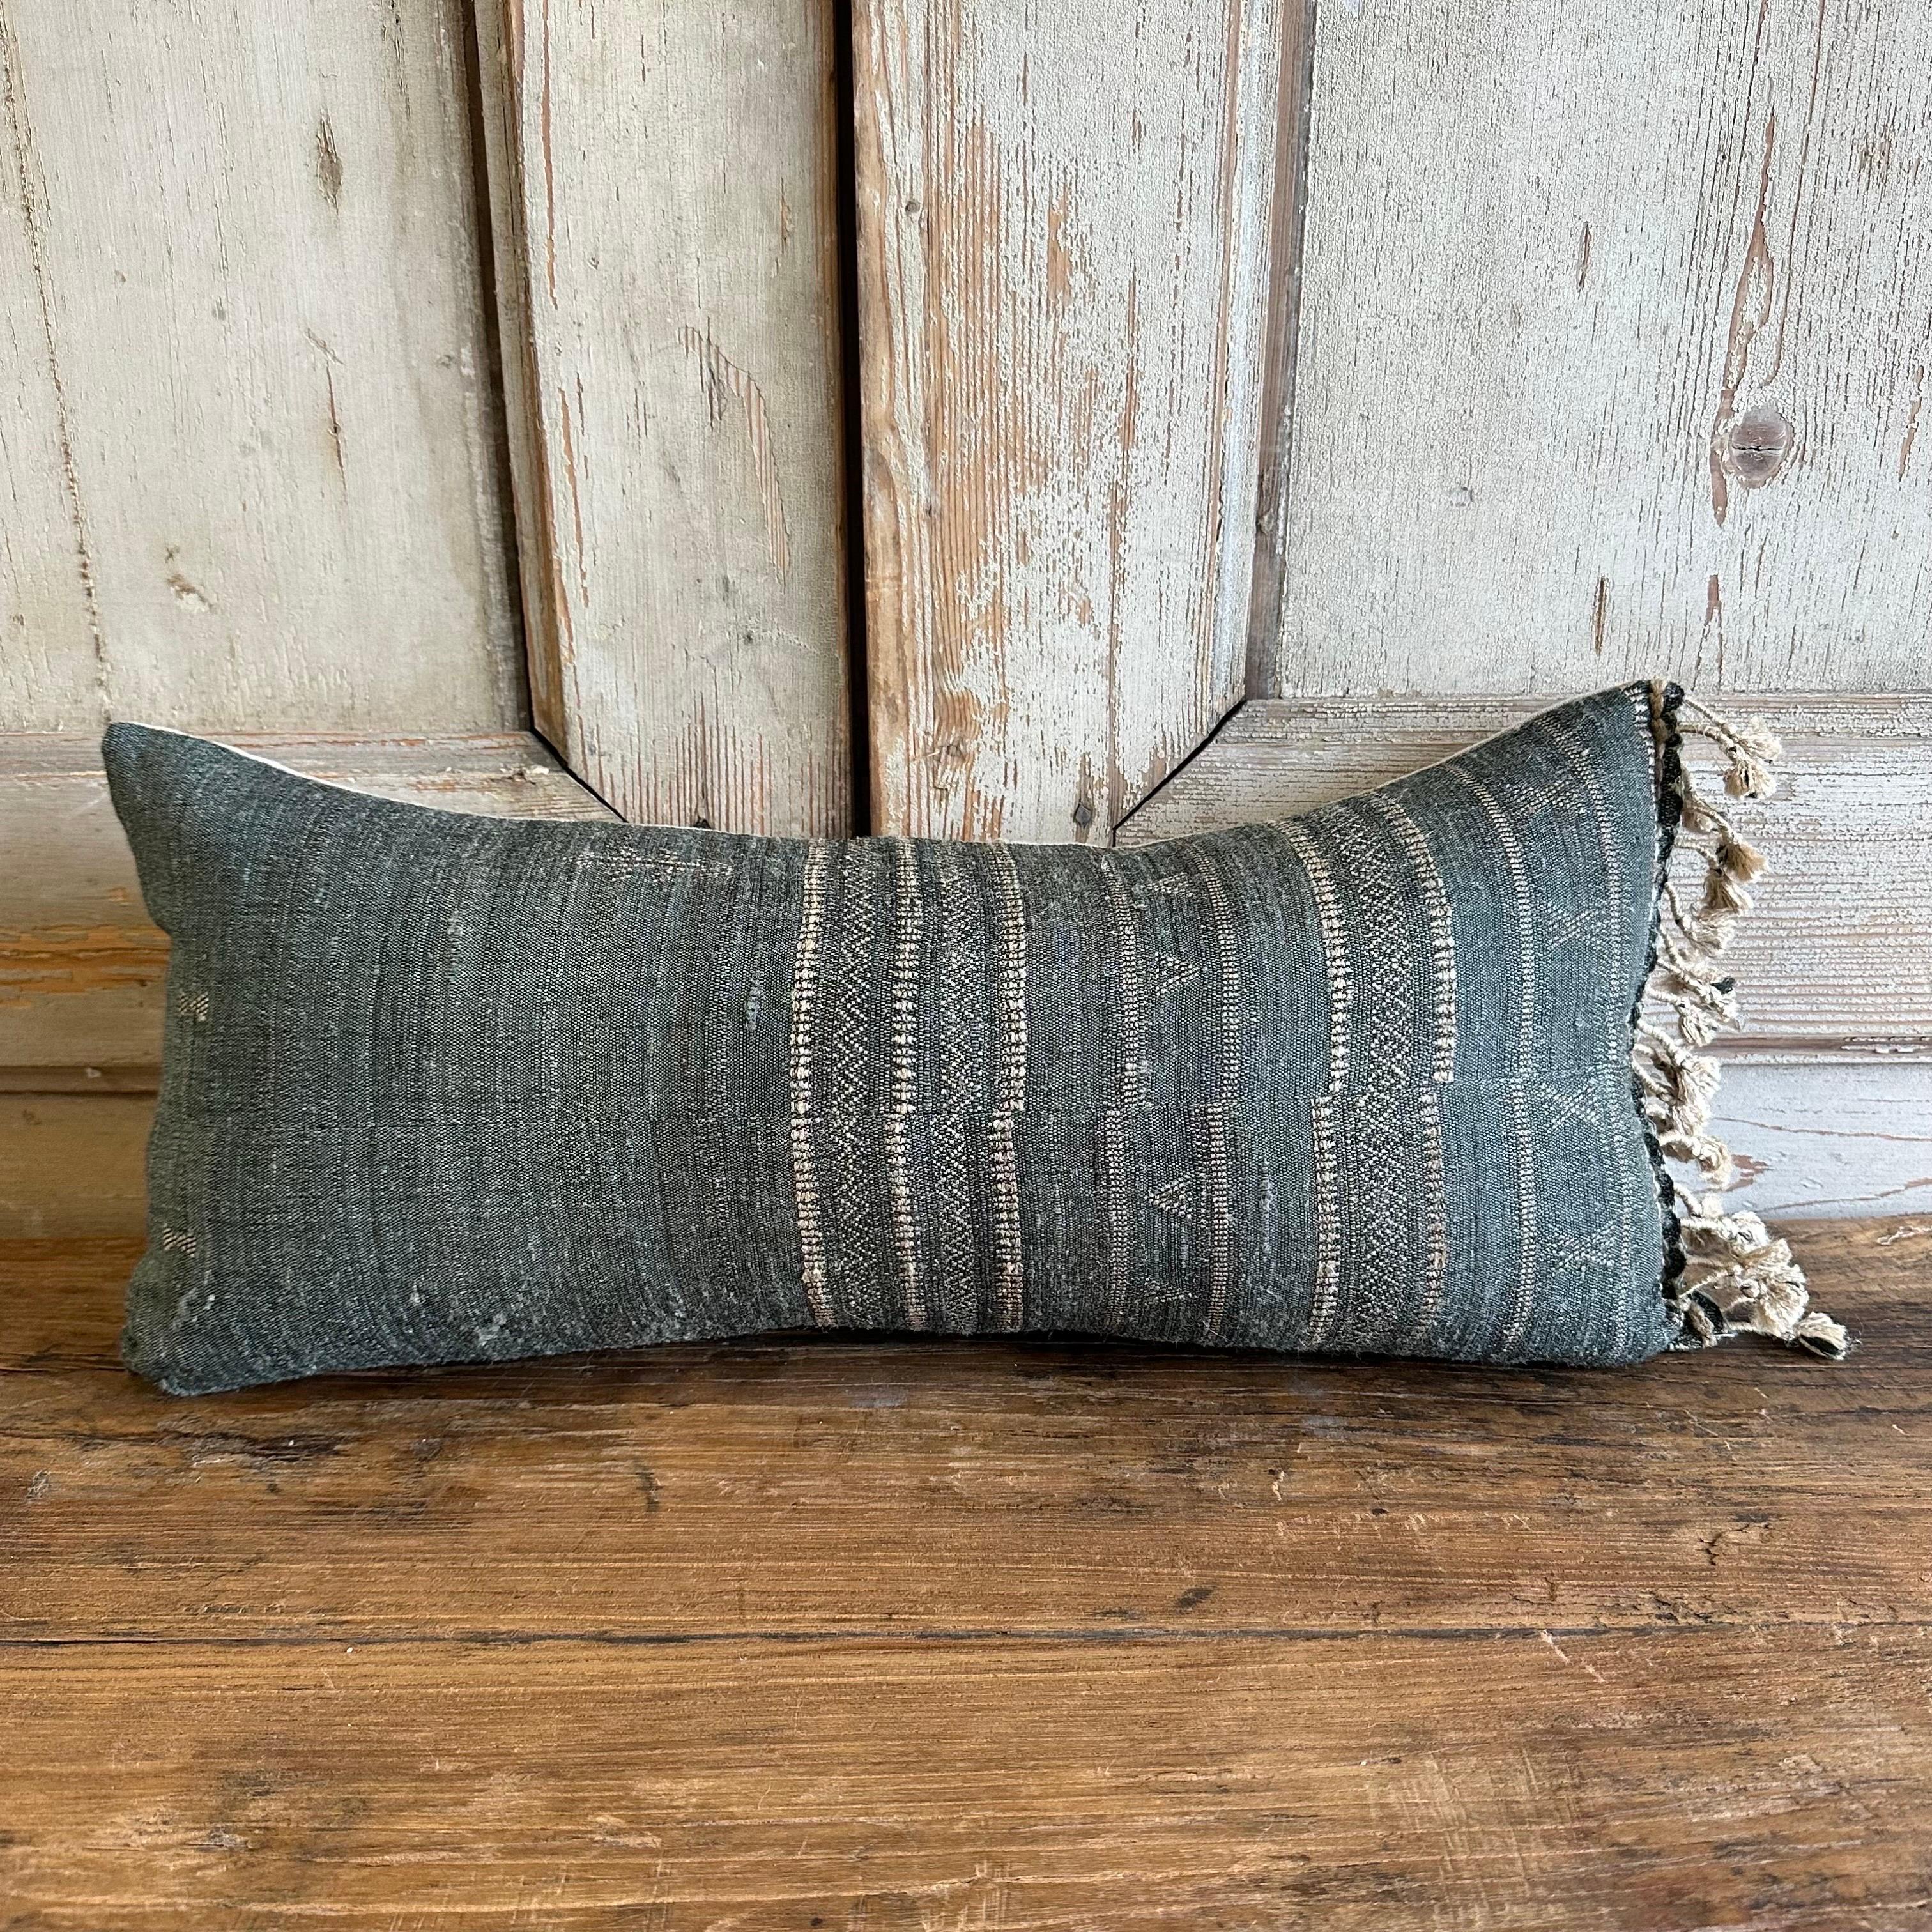 A beautiful linen, wool and silk pillow made from vintage textiles. 
The backing is a solid natural linen, with hidden zipper closure, and down/feather insert.
In a denim, indigo faded color, with natural embroidery and natural tie tassels, this